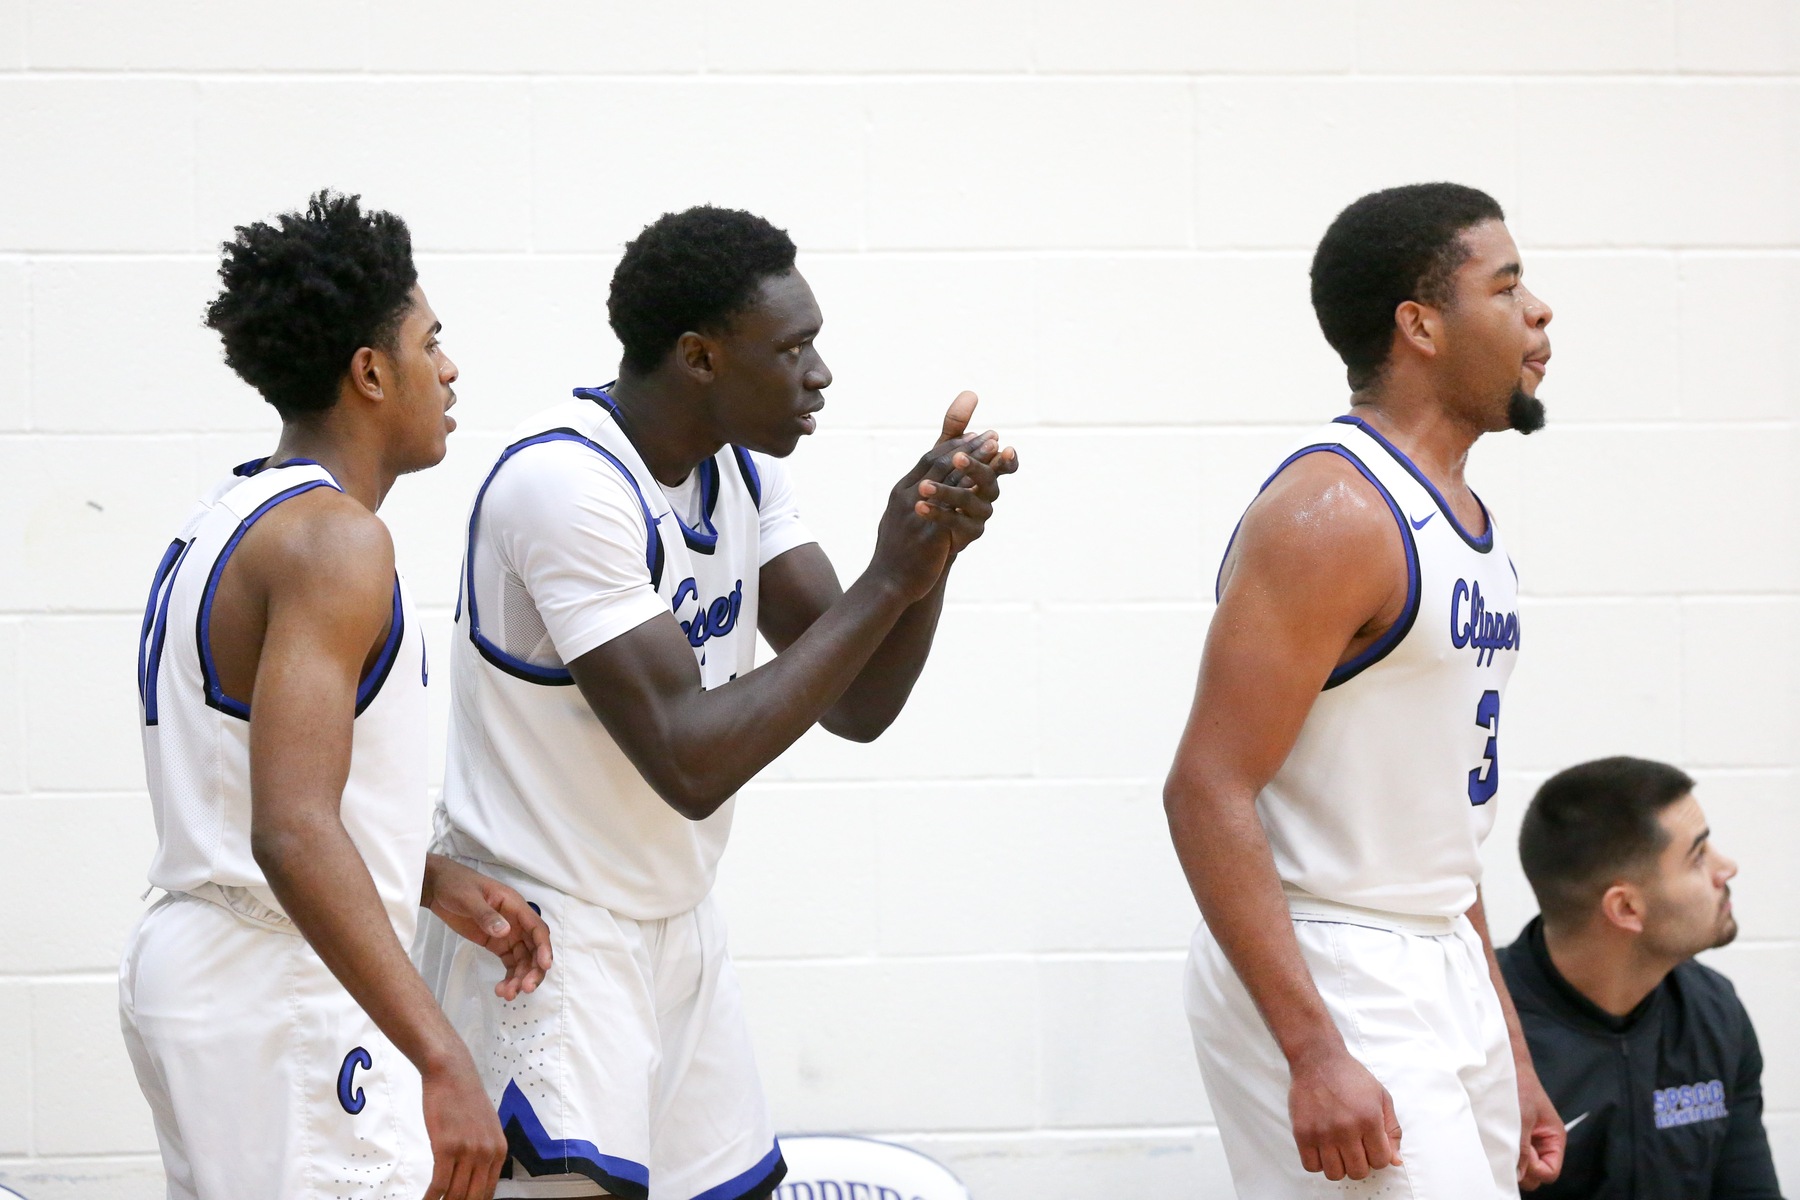 Men's Basketball clinches league opener